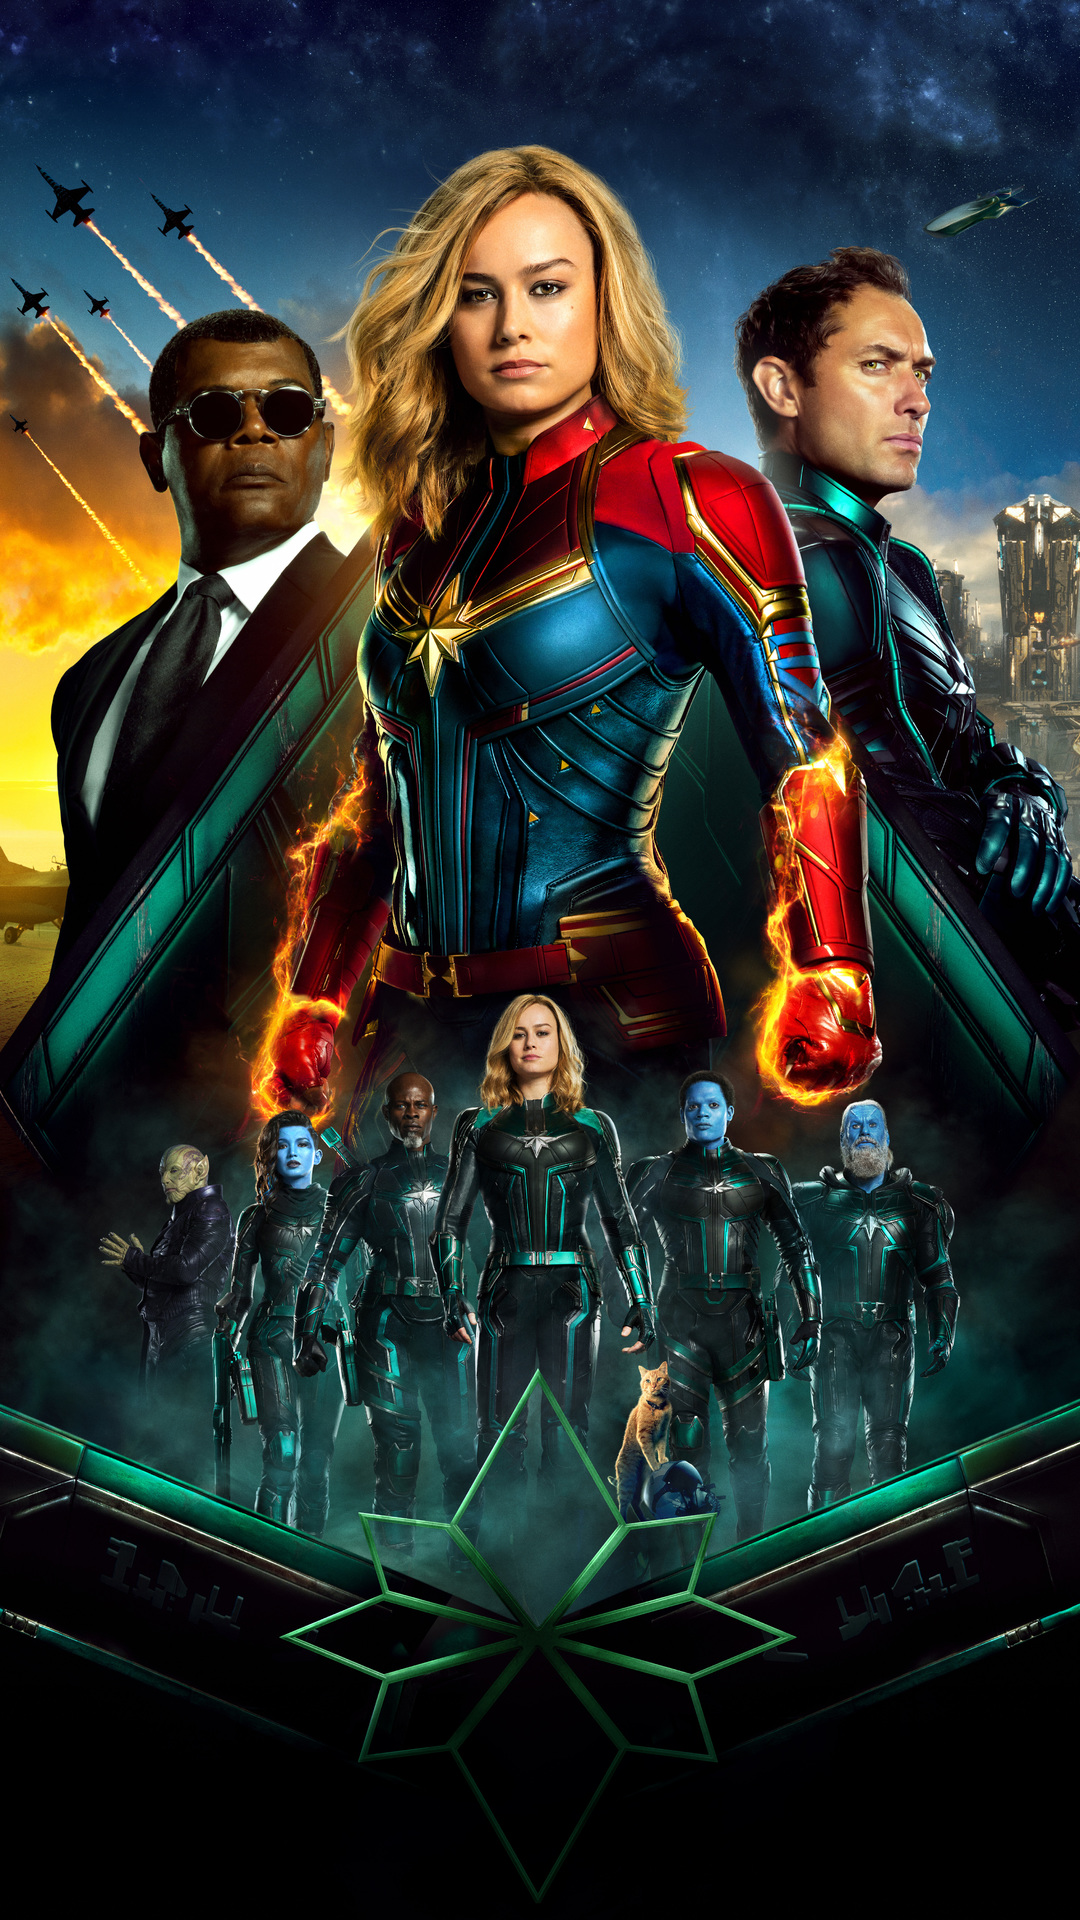 1080x1920 captain marvel movie, poster, captain marvel, 2019 movies, movies, hd, brie larson, carol danvers for iPhone 8 wallpaper